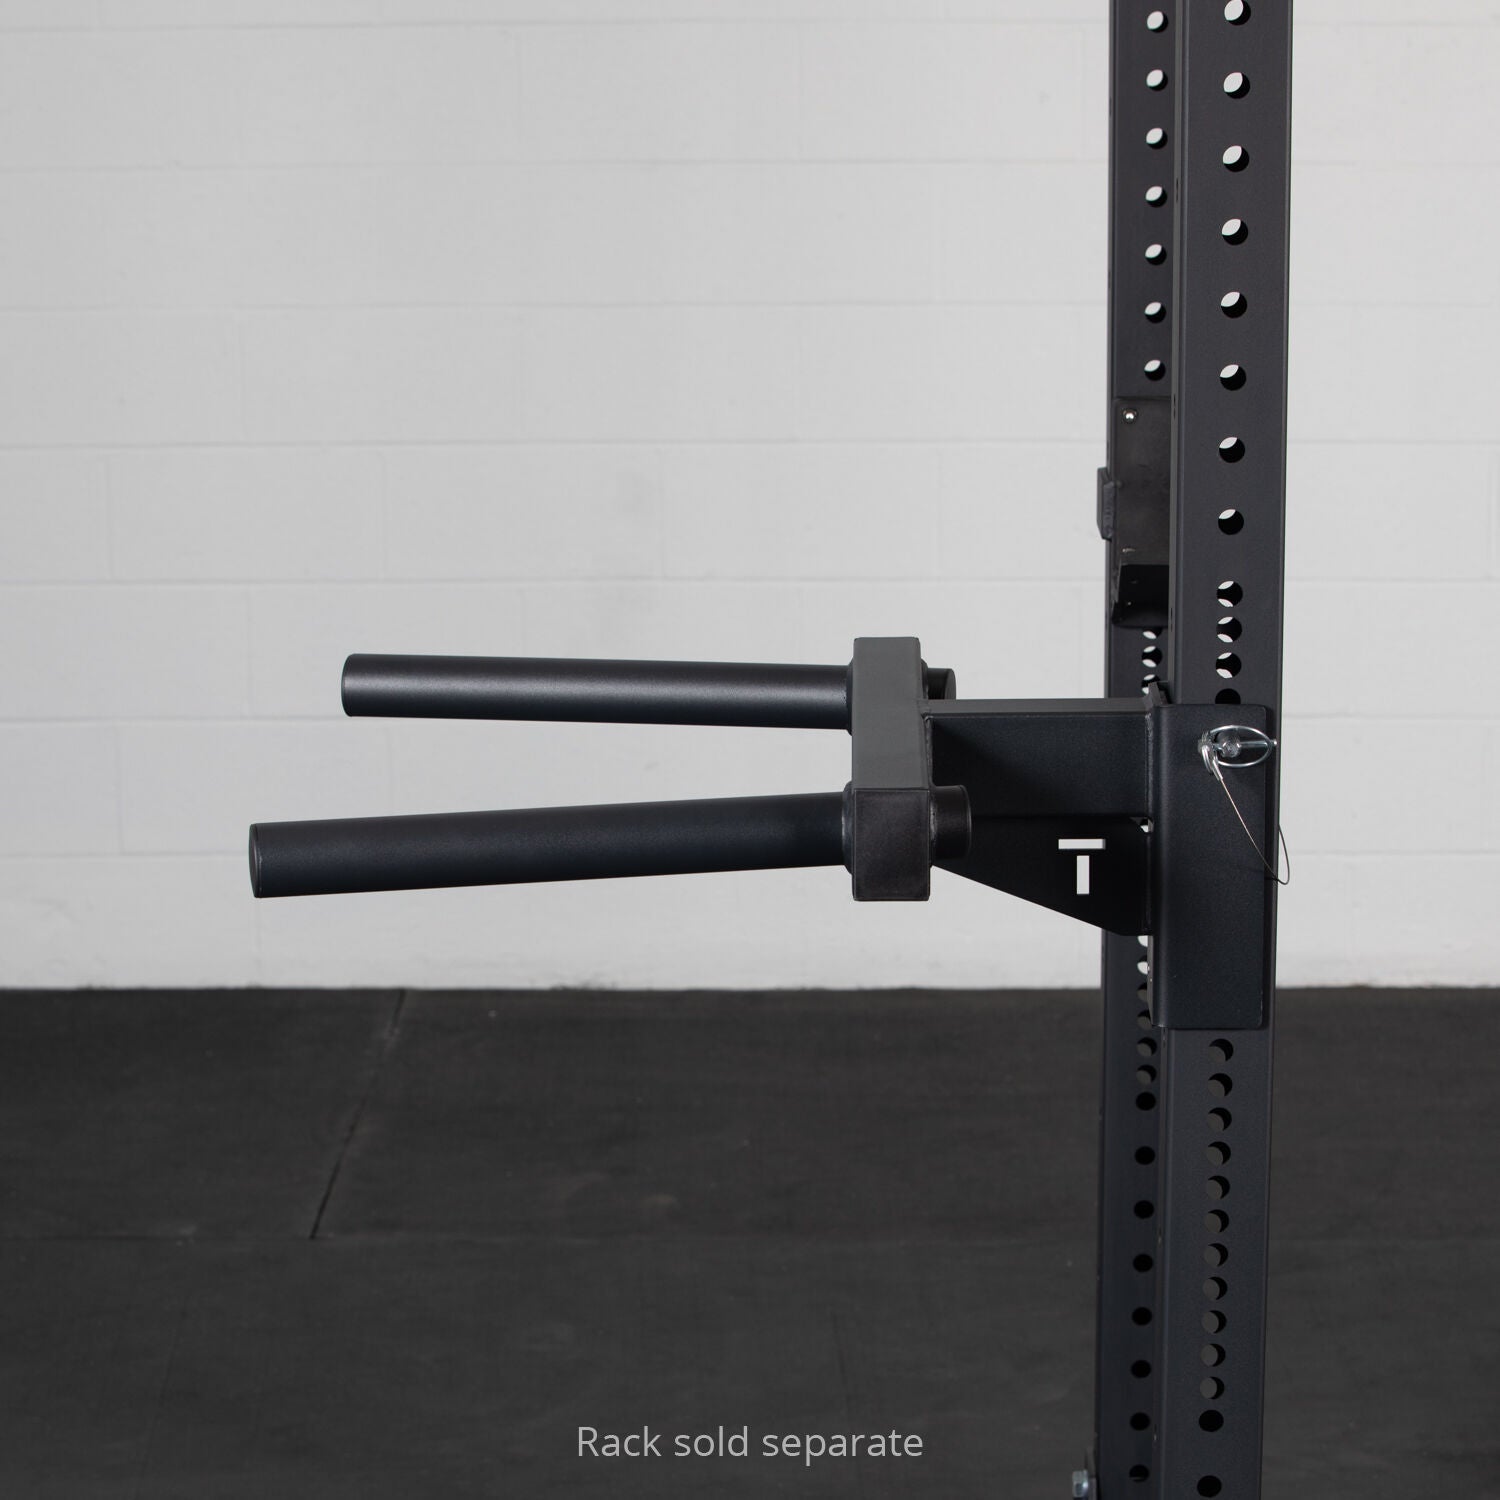 A sturdy black Titan Fitness X-3 Series Y-Dip bar attachment securely mounted to a squat rack with the noticeable label "rack sold separate," indicating the rack is not included with the dip station.